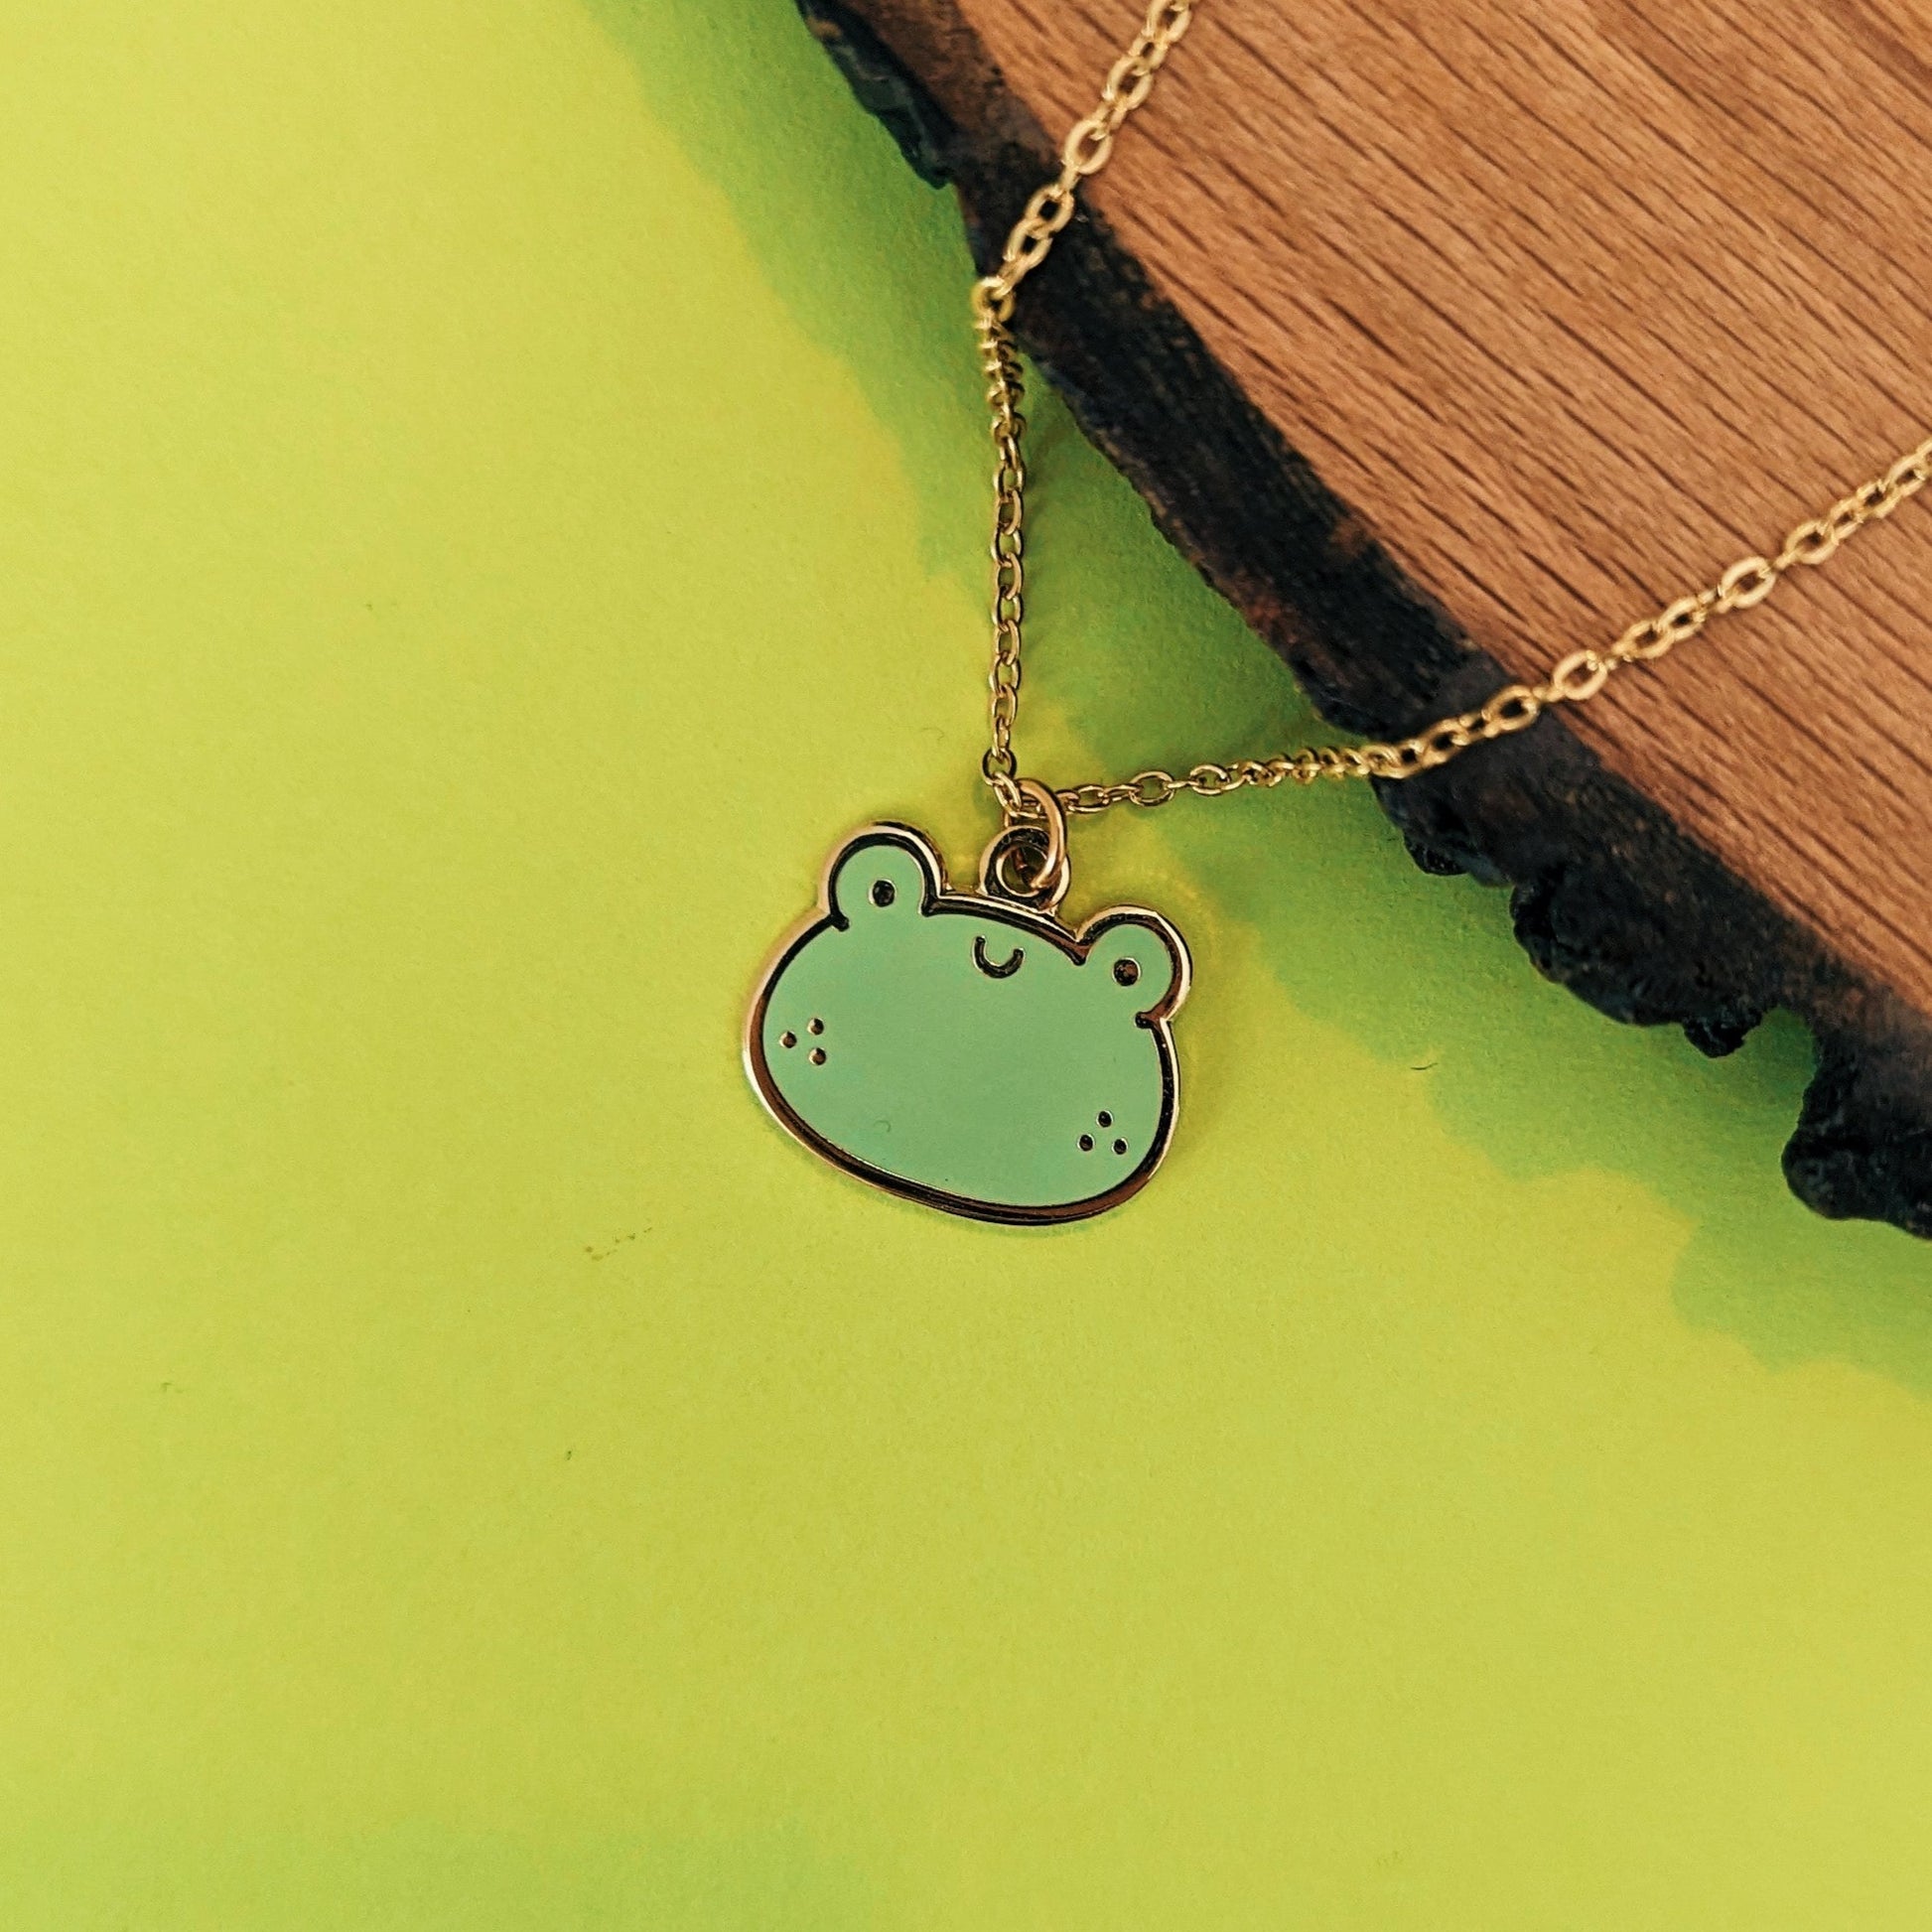 FROG NECKLACE - FROG JEWELLERY